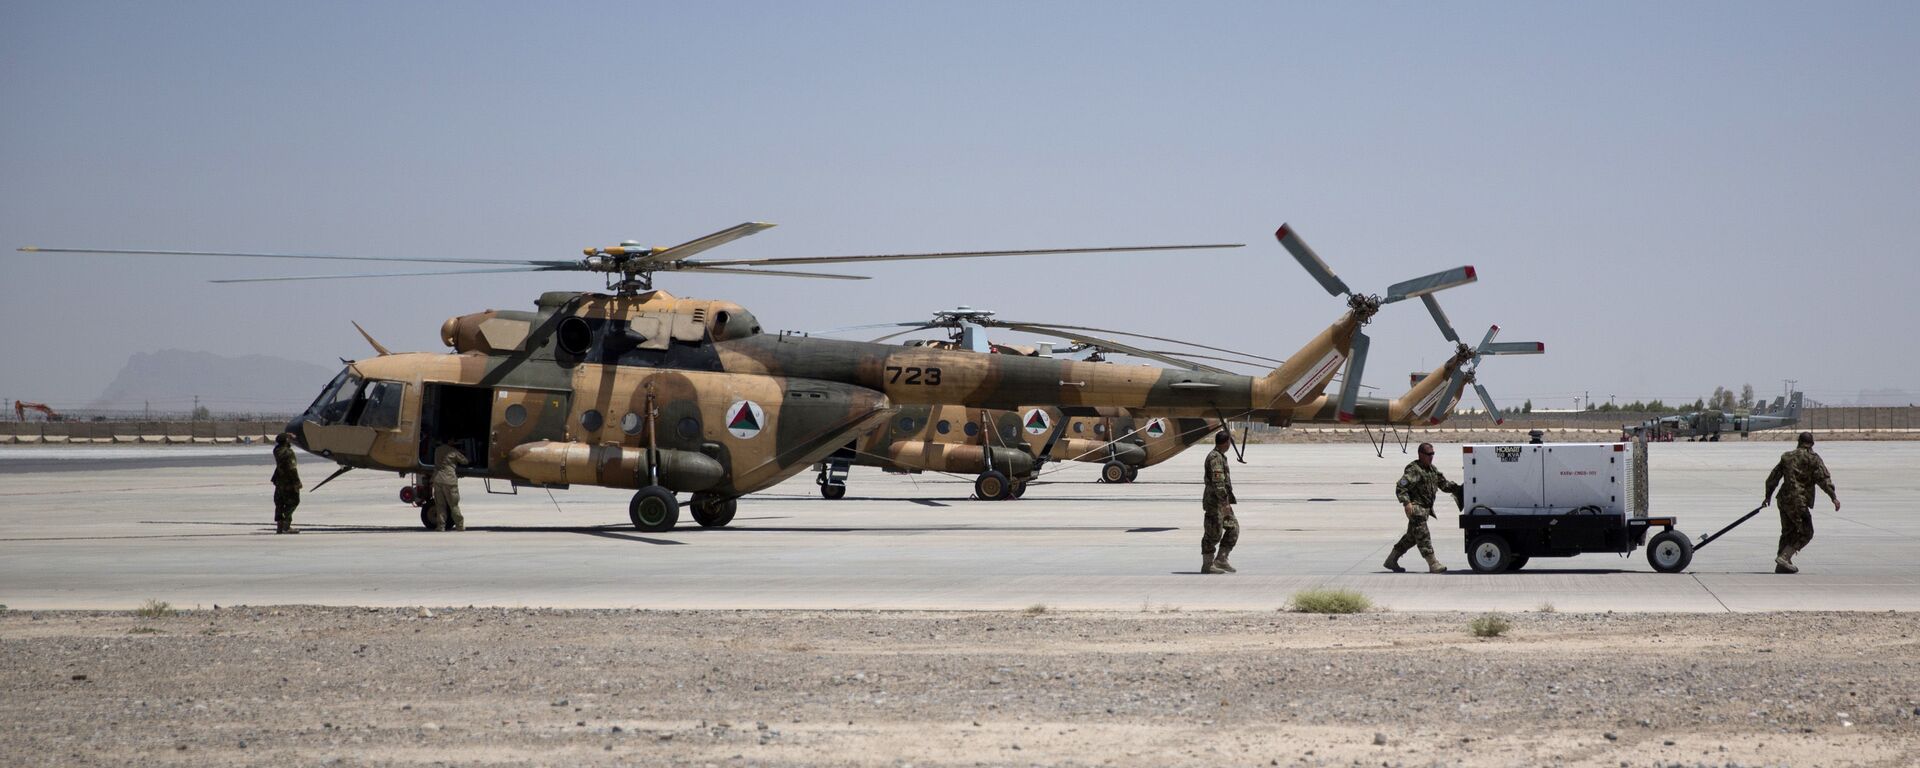 Members of Afghanistan's National Army work near military helicopters, in Kandahar Air Field, Afghanistan, Tuesday, Aug. 18, 2015. Since the departure from Afghanistan last year of most international combat troops, Afghan security forces have been fighting the insurgency alone. Figures show that casualty rates are extremely high, reflecting an emboldened Taliban testing the commitment and strength of the Afghan military. (AP Photo/Massoud Hossaini) - Sputnik International, 1920, 15.08.2021